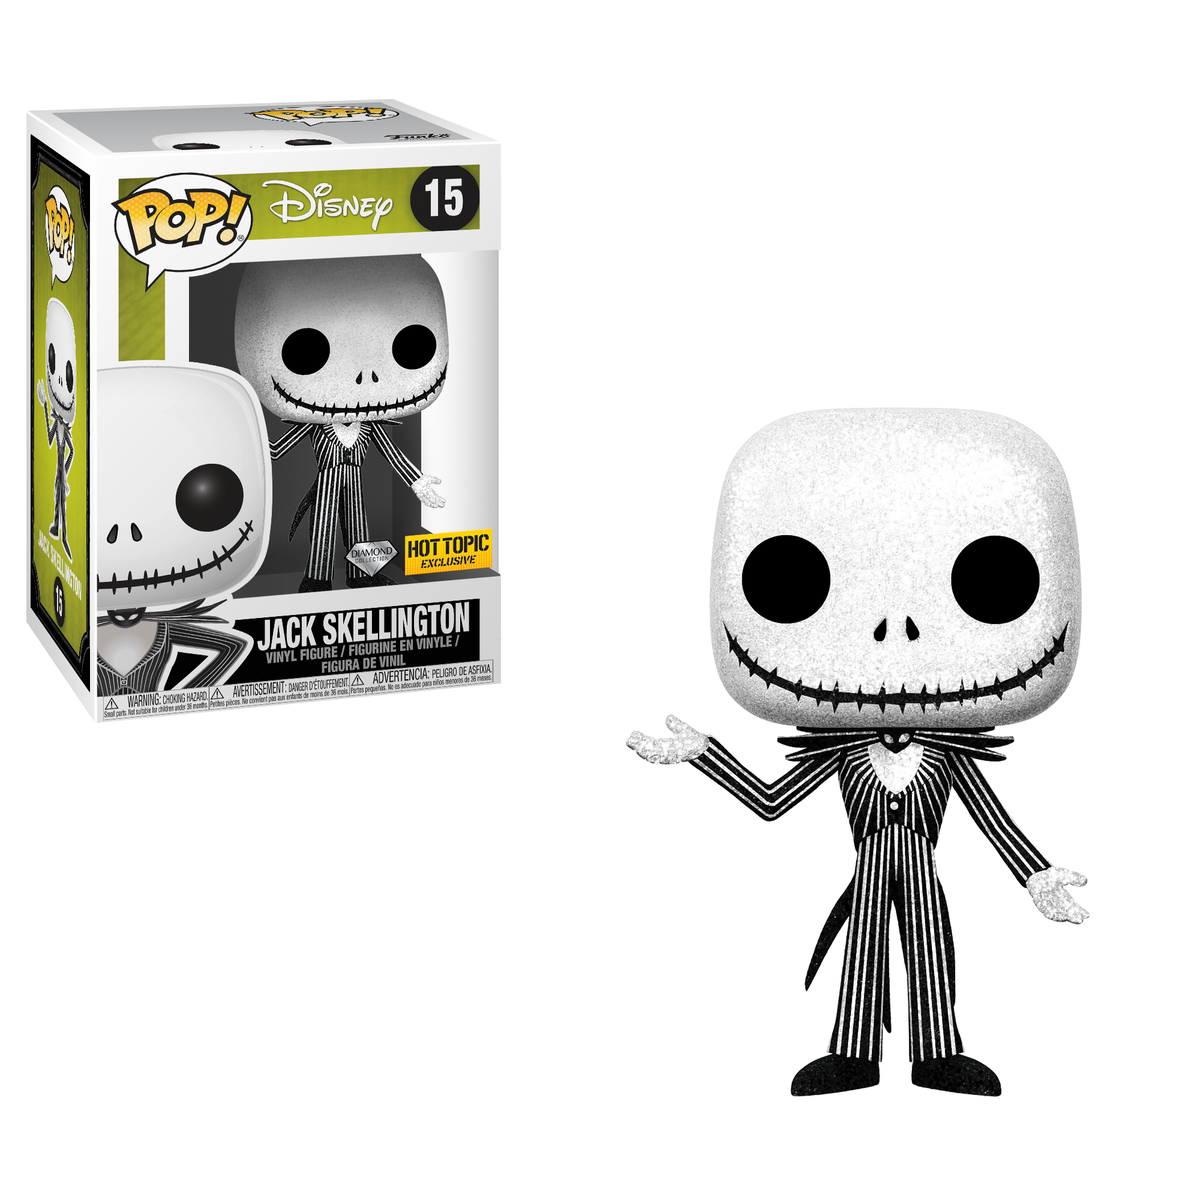 RT & follow @OriginalFunko for the chance to win a @HotTopic exclusive Diamond Collection Jack Skellington Pop!